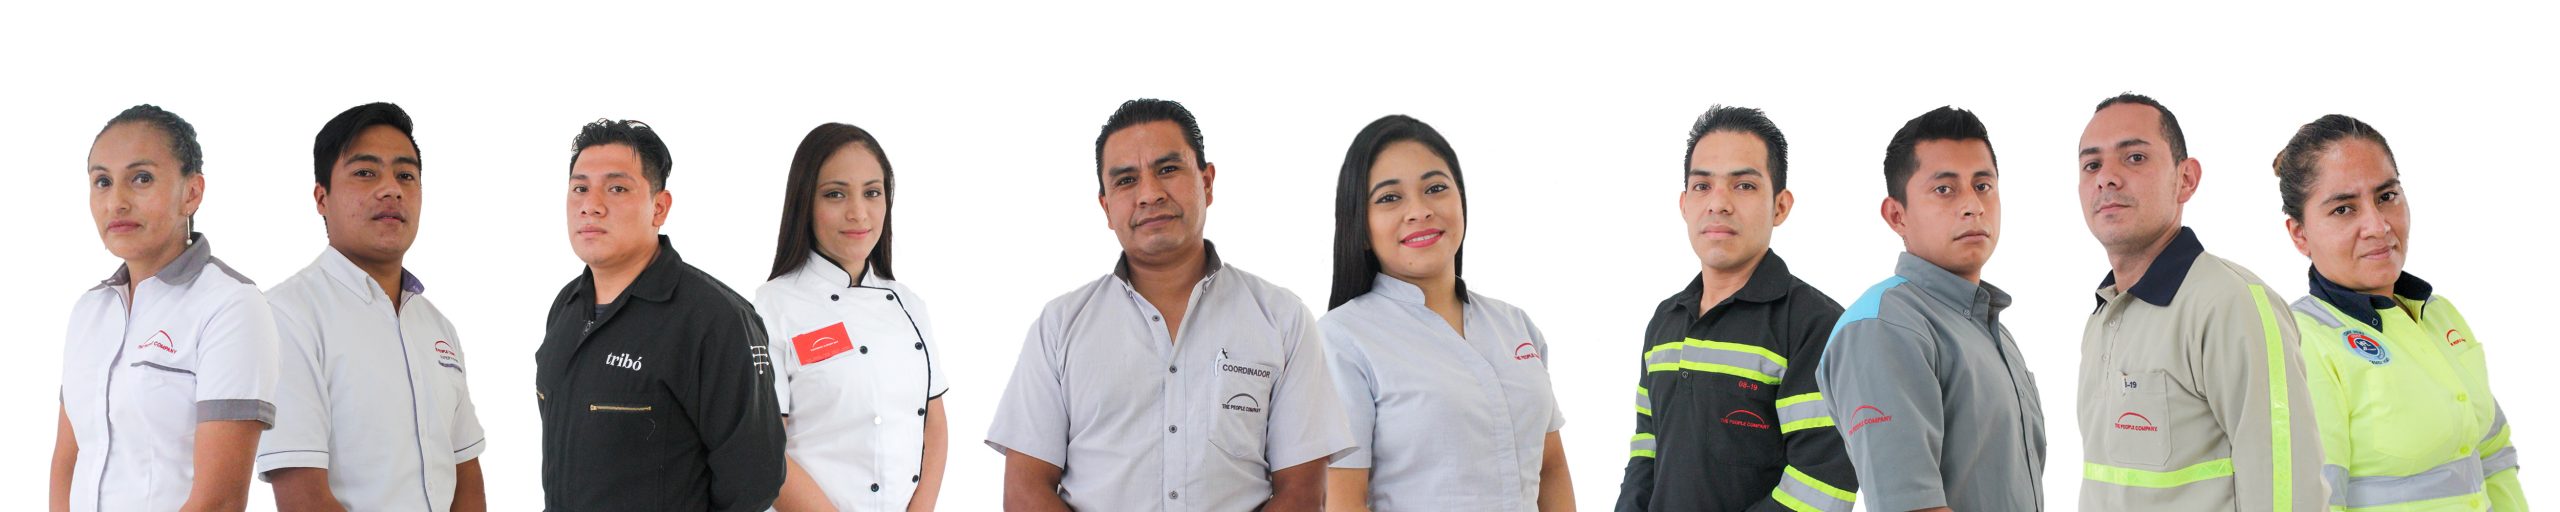 equipo outsourcing The People Company